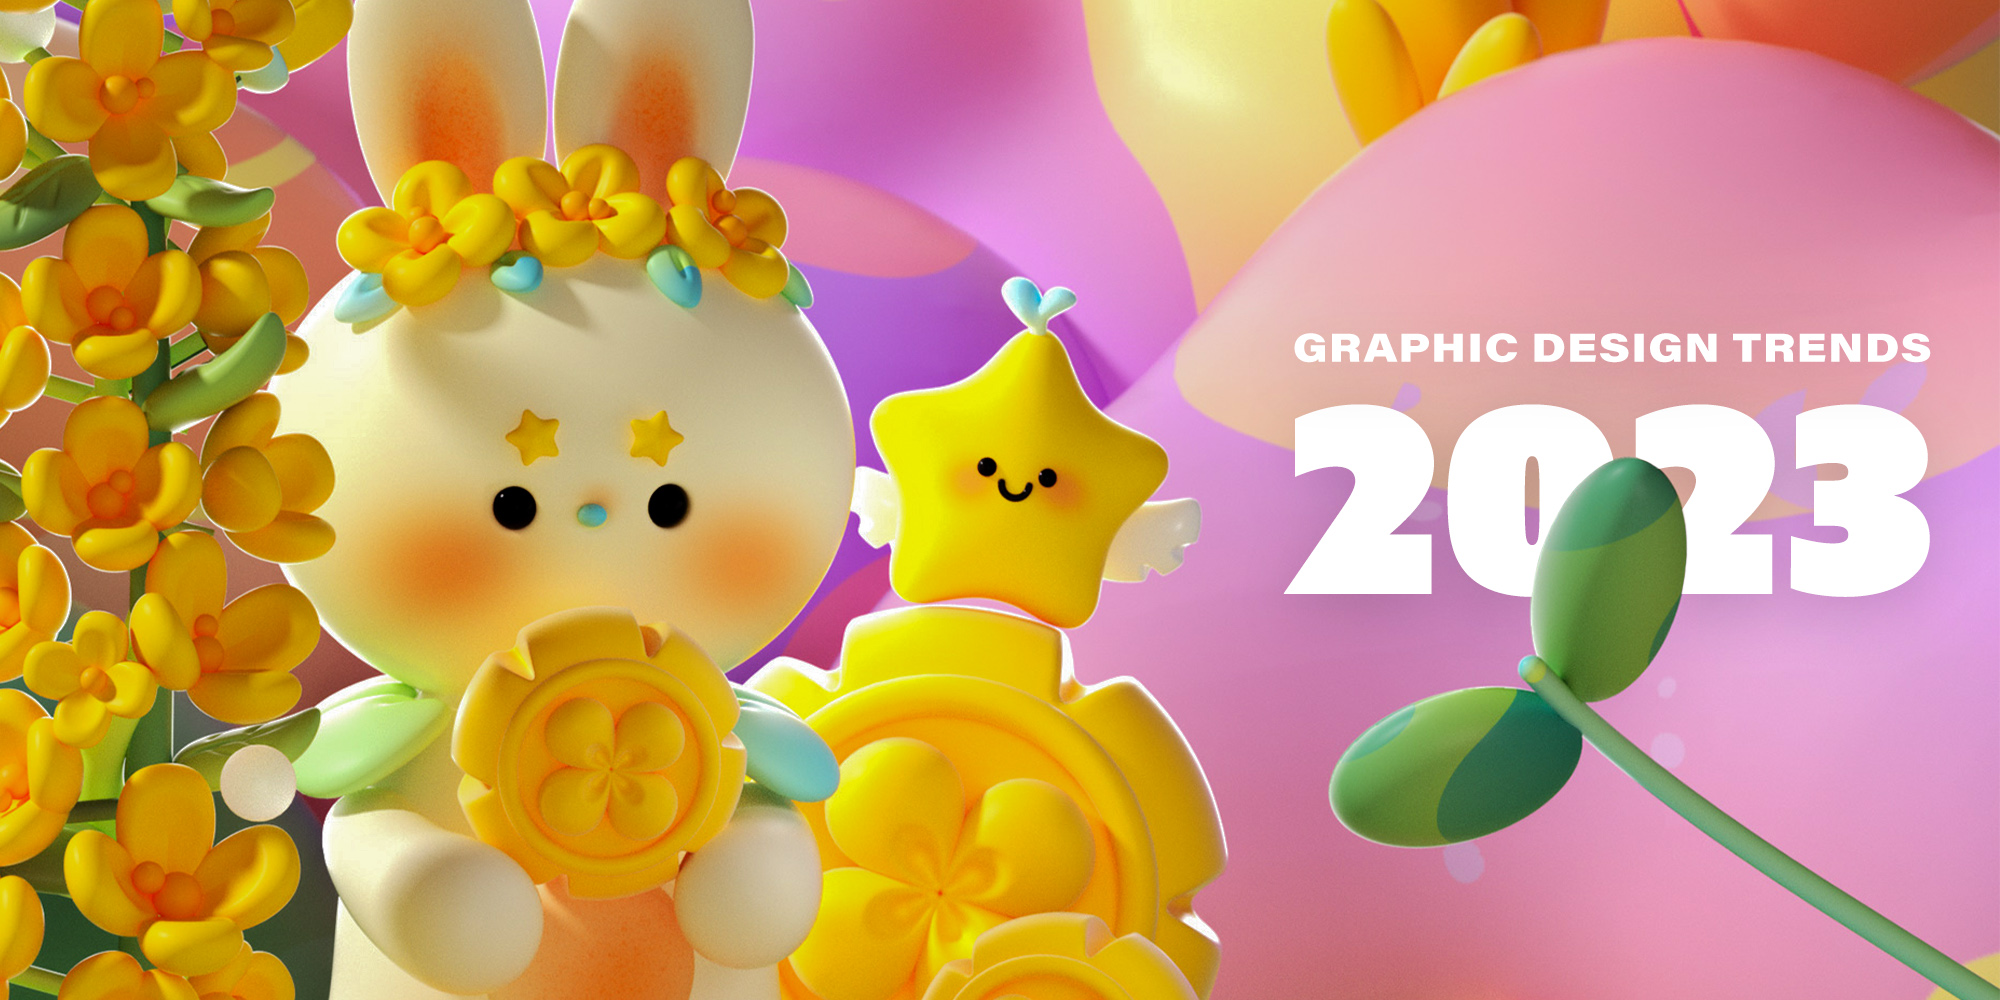 Graphic Design Trends For 2023